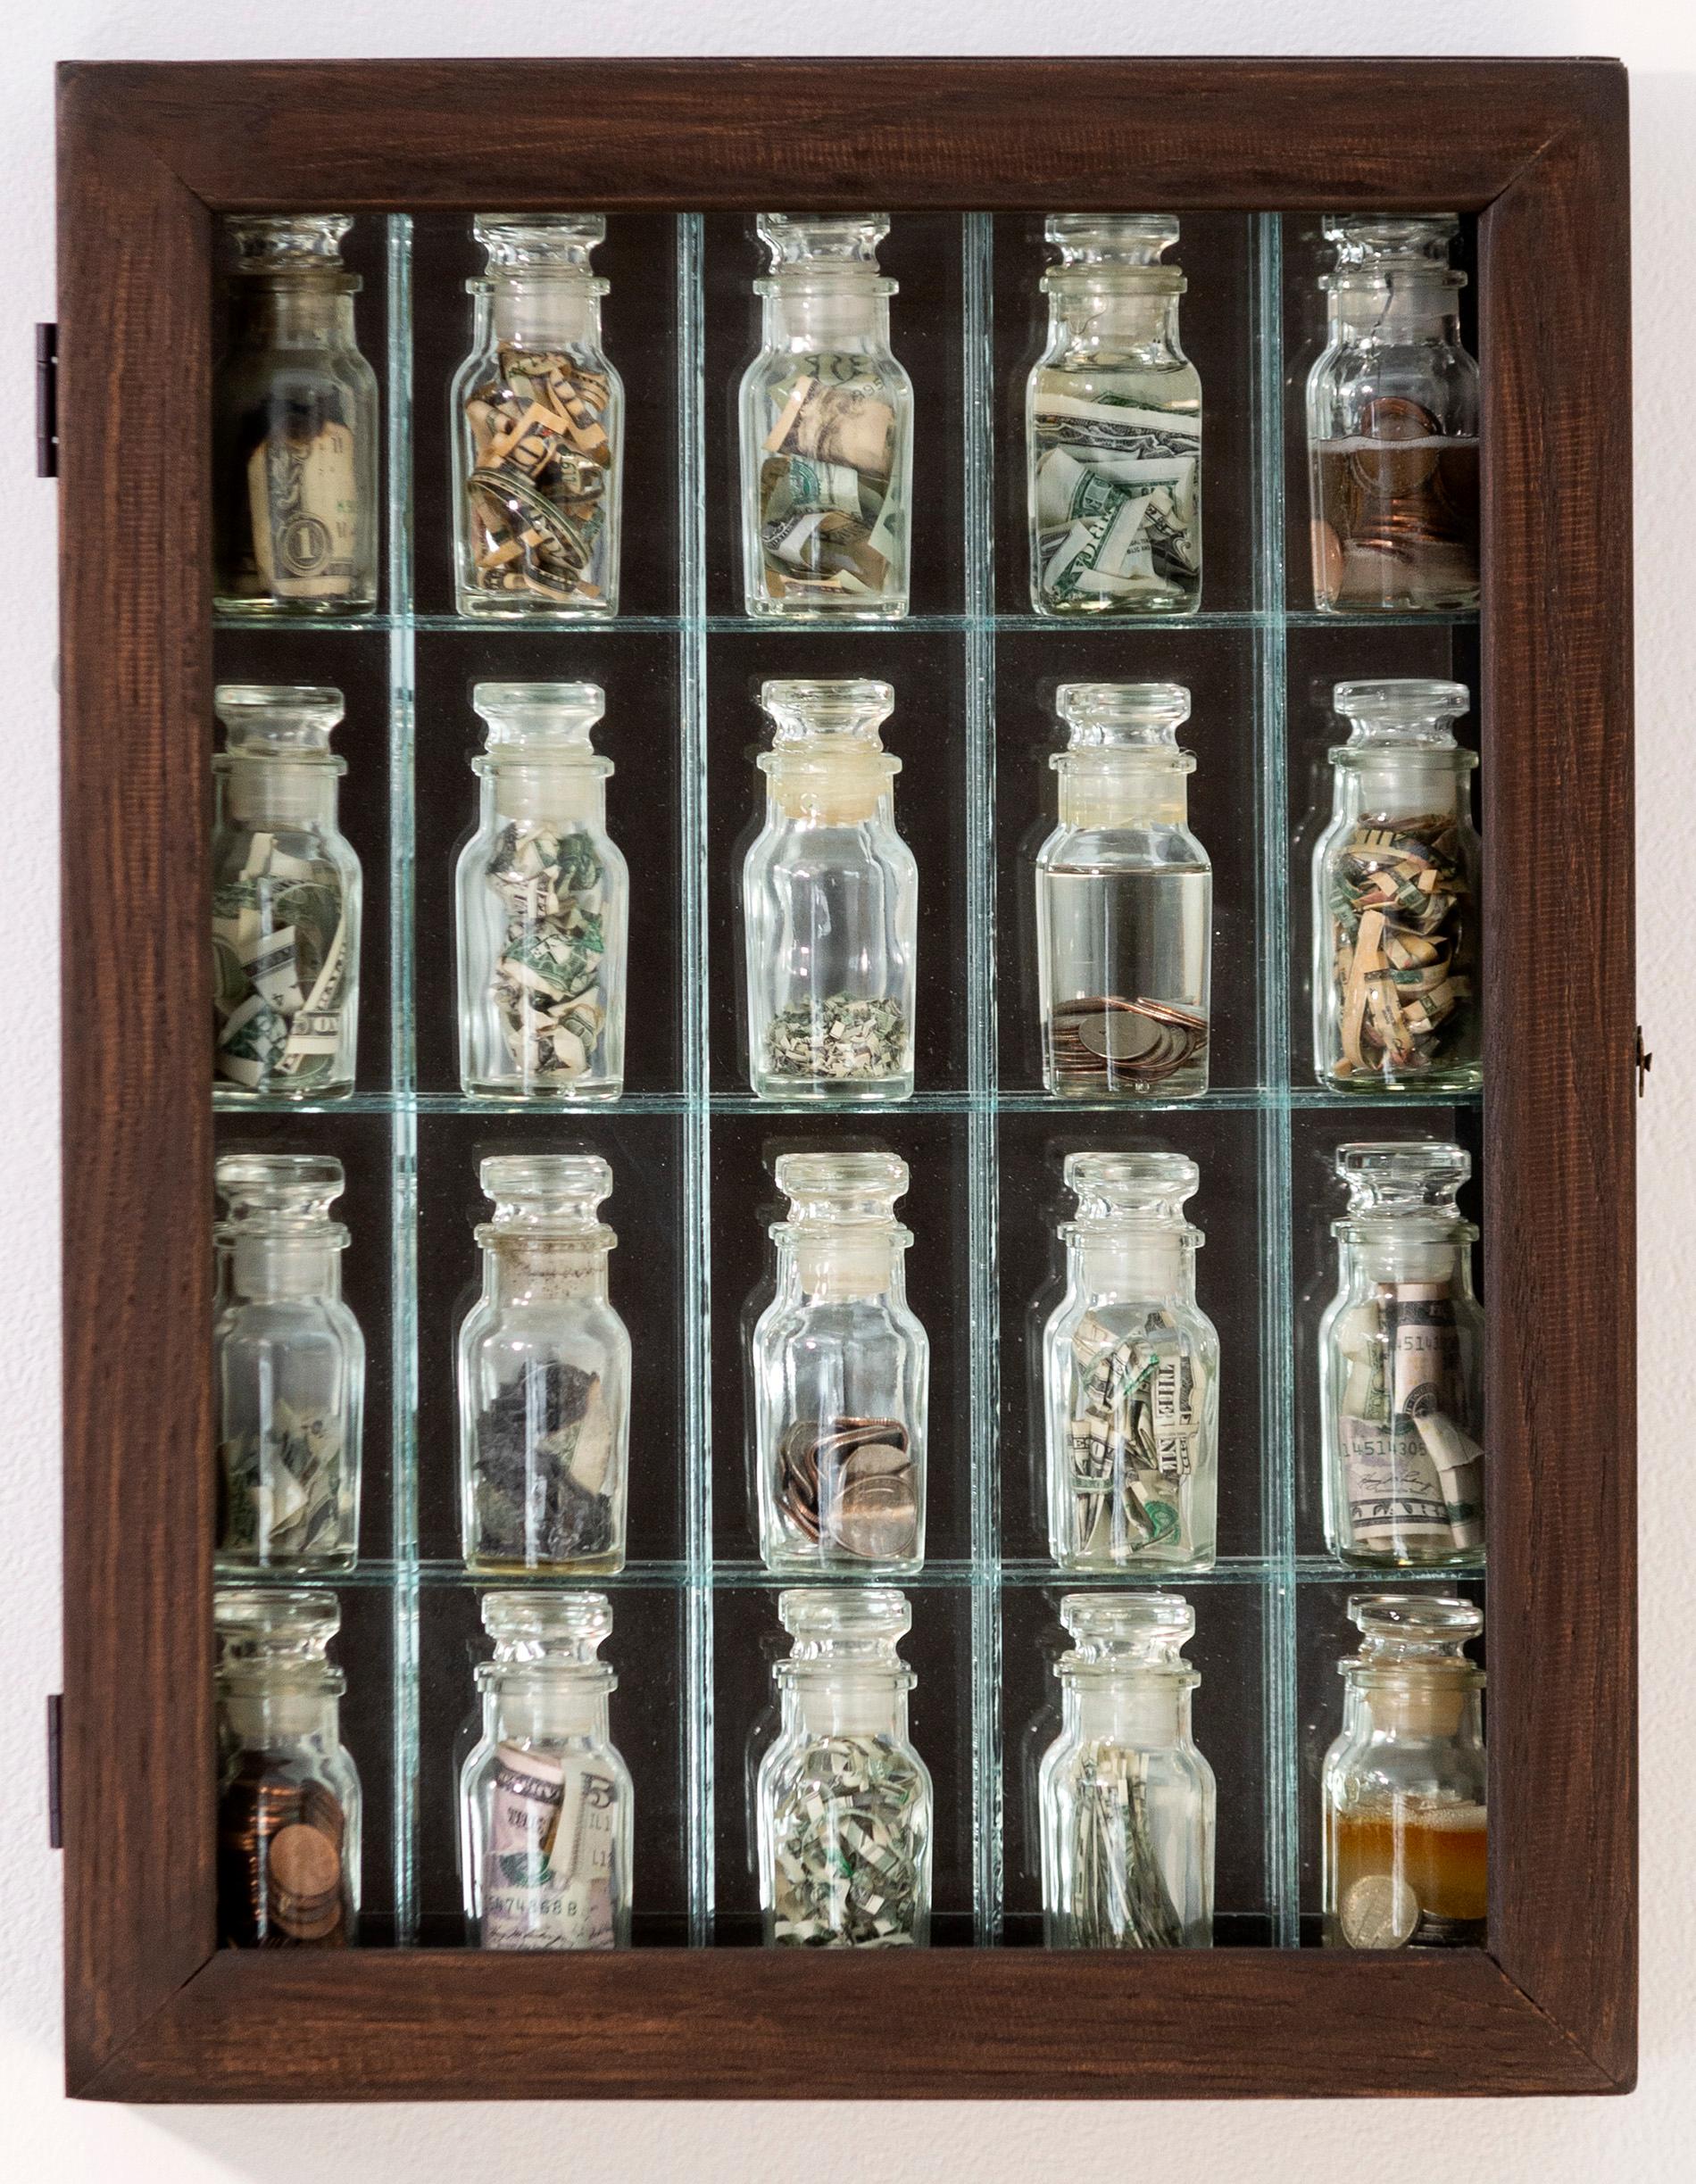 Stimulus Package - cabinet, bottles, money, mixed media, wall sculpture